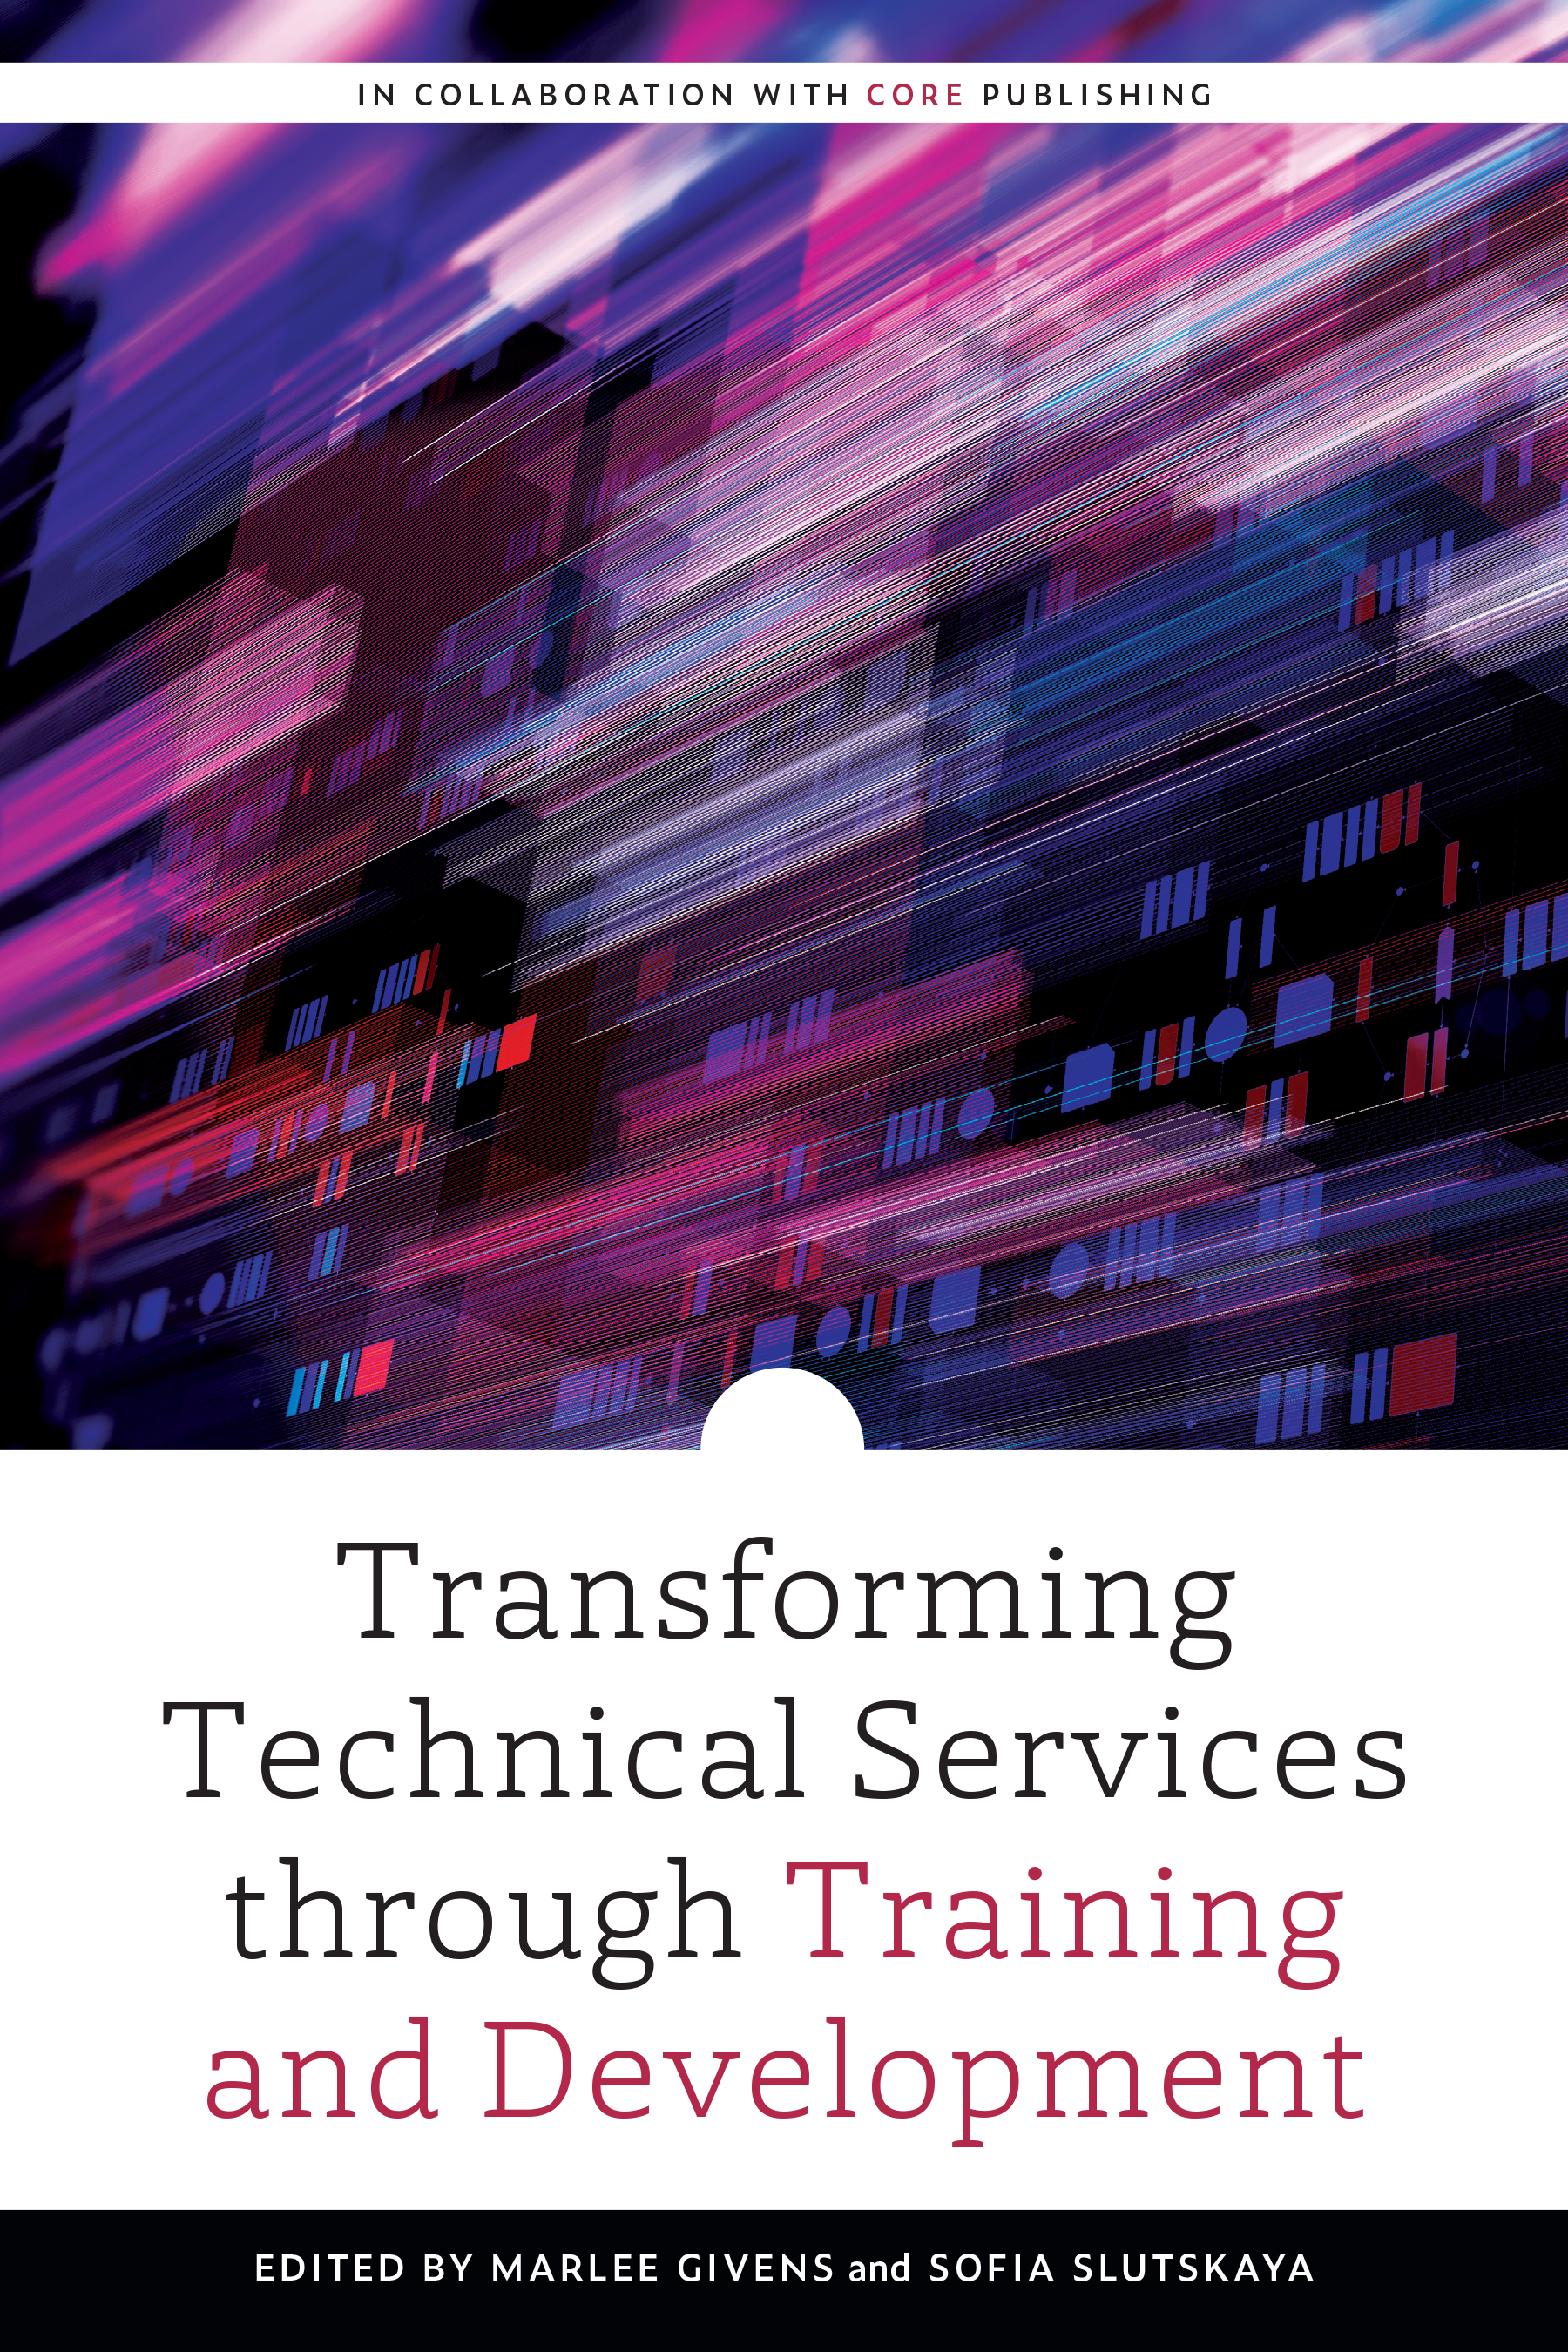 Transforming Technical Services through Training and